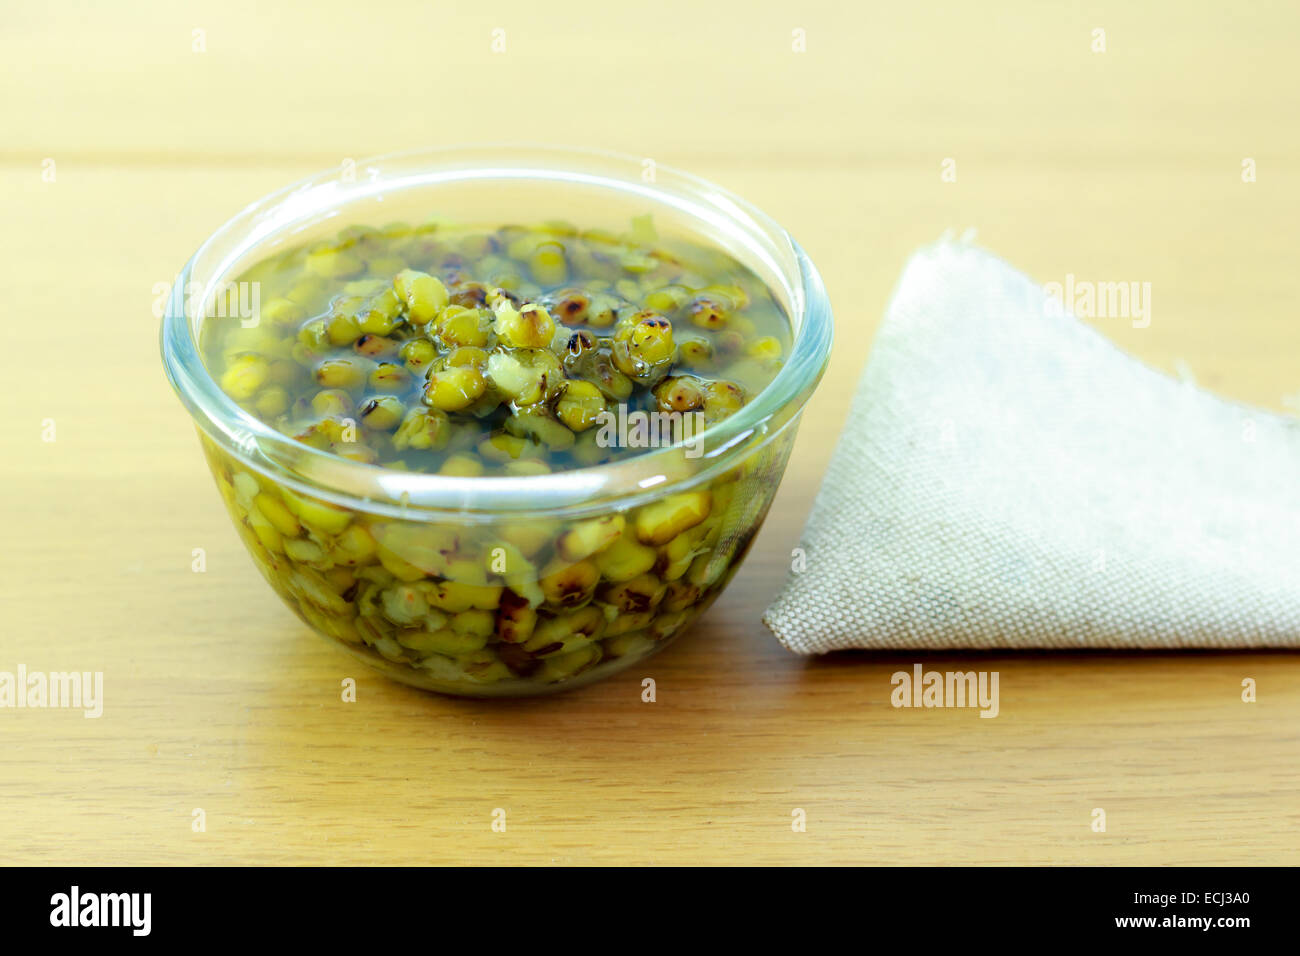 Mung beans in light syrup Deserts of Thailand Stock Photo